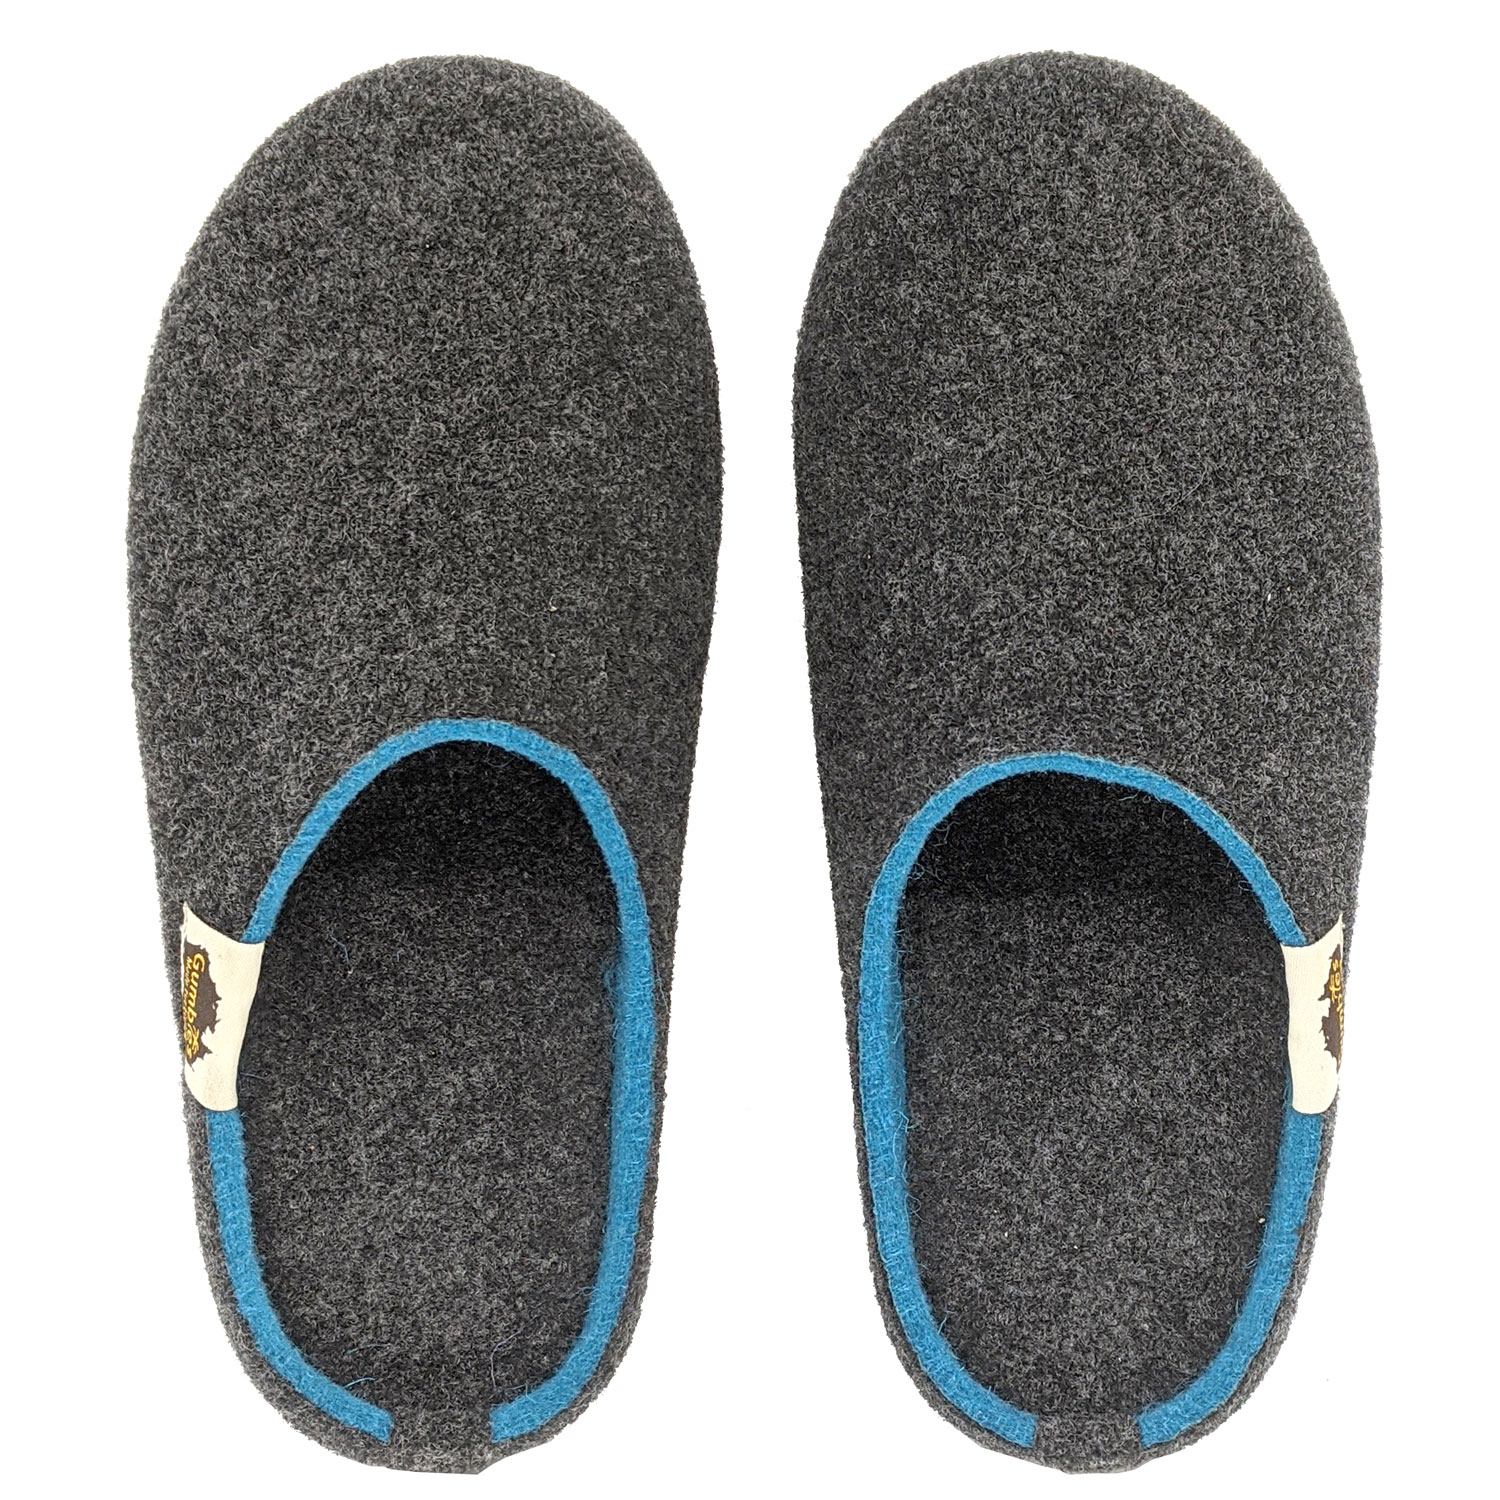 GUMBIES – Outback Slipper, Charcoal Turquoise 